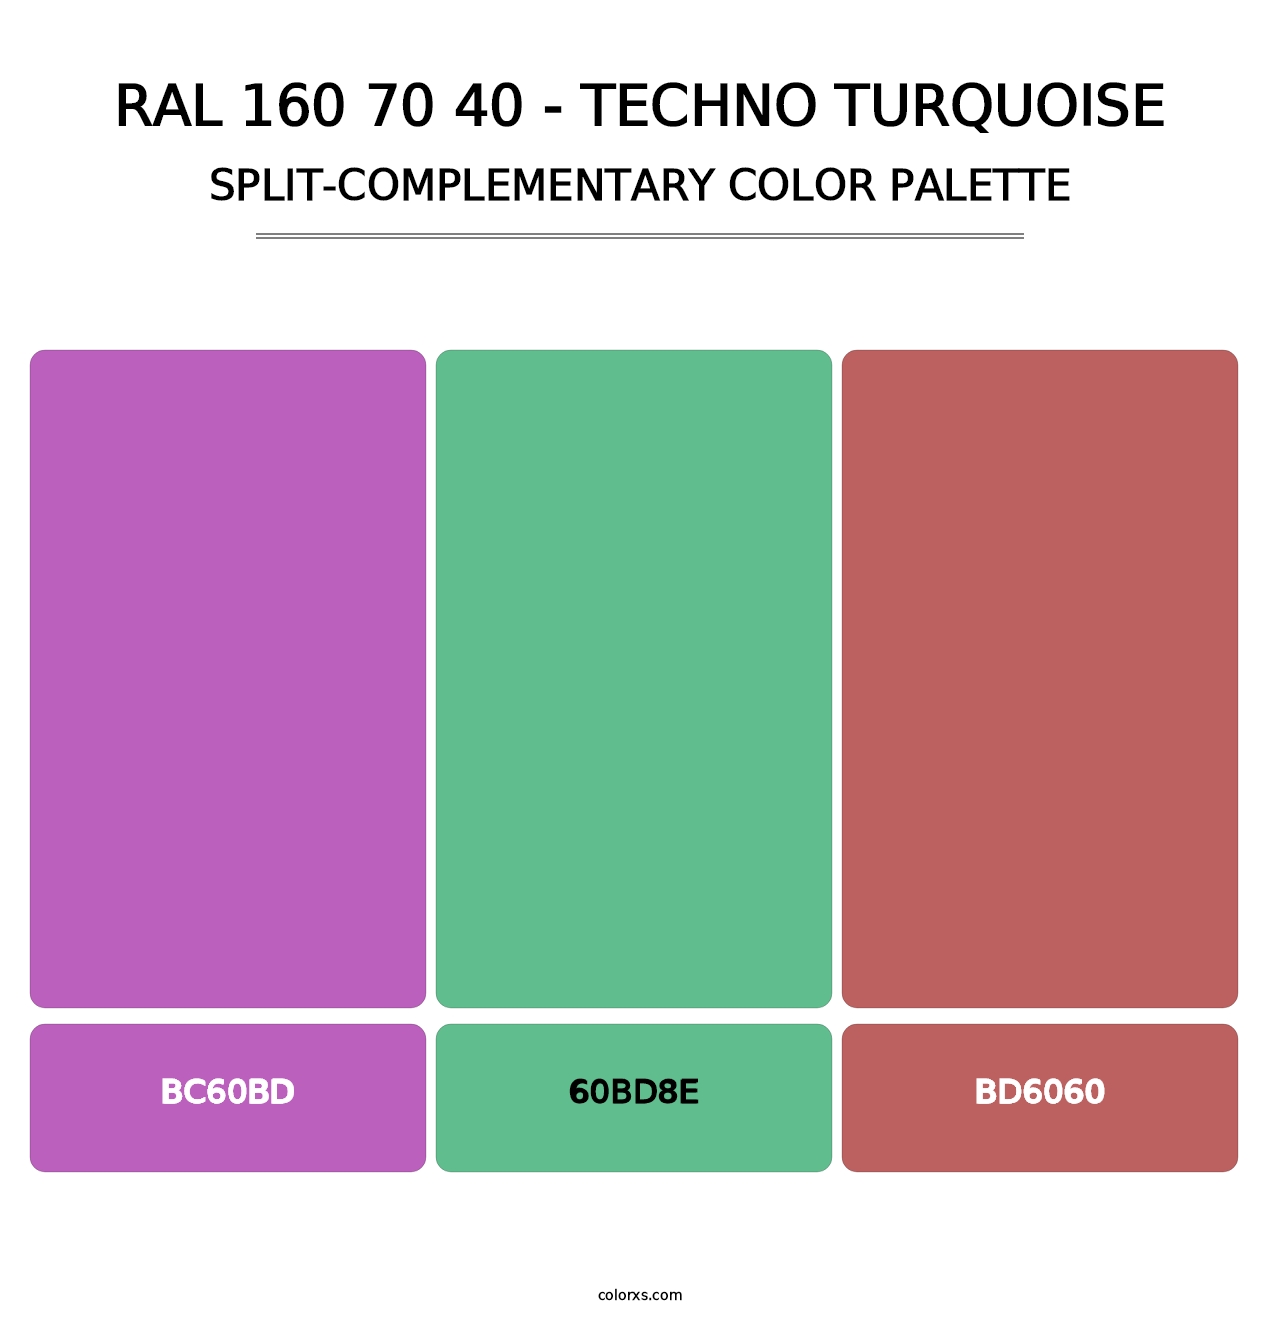 RAL 160 70 40 - Techno Turquoise - Split-Complementary Color Palette